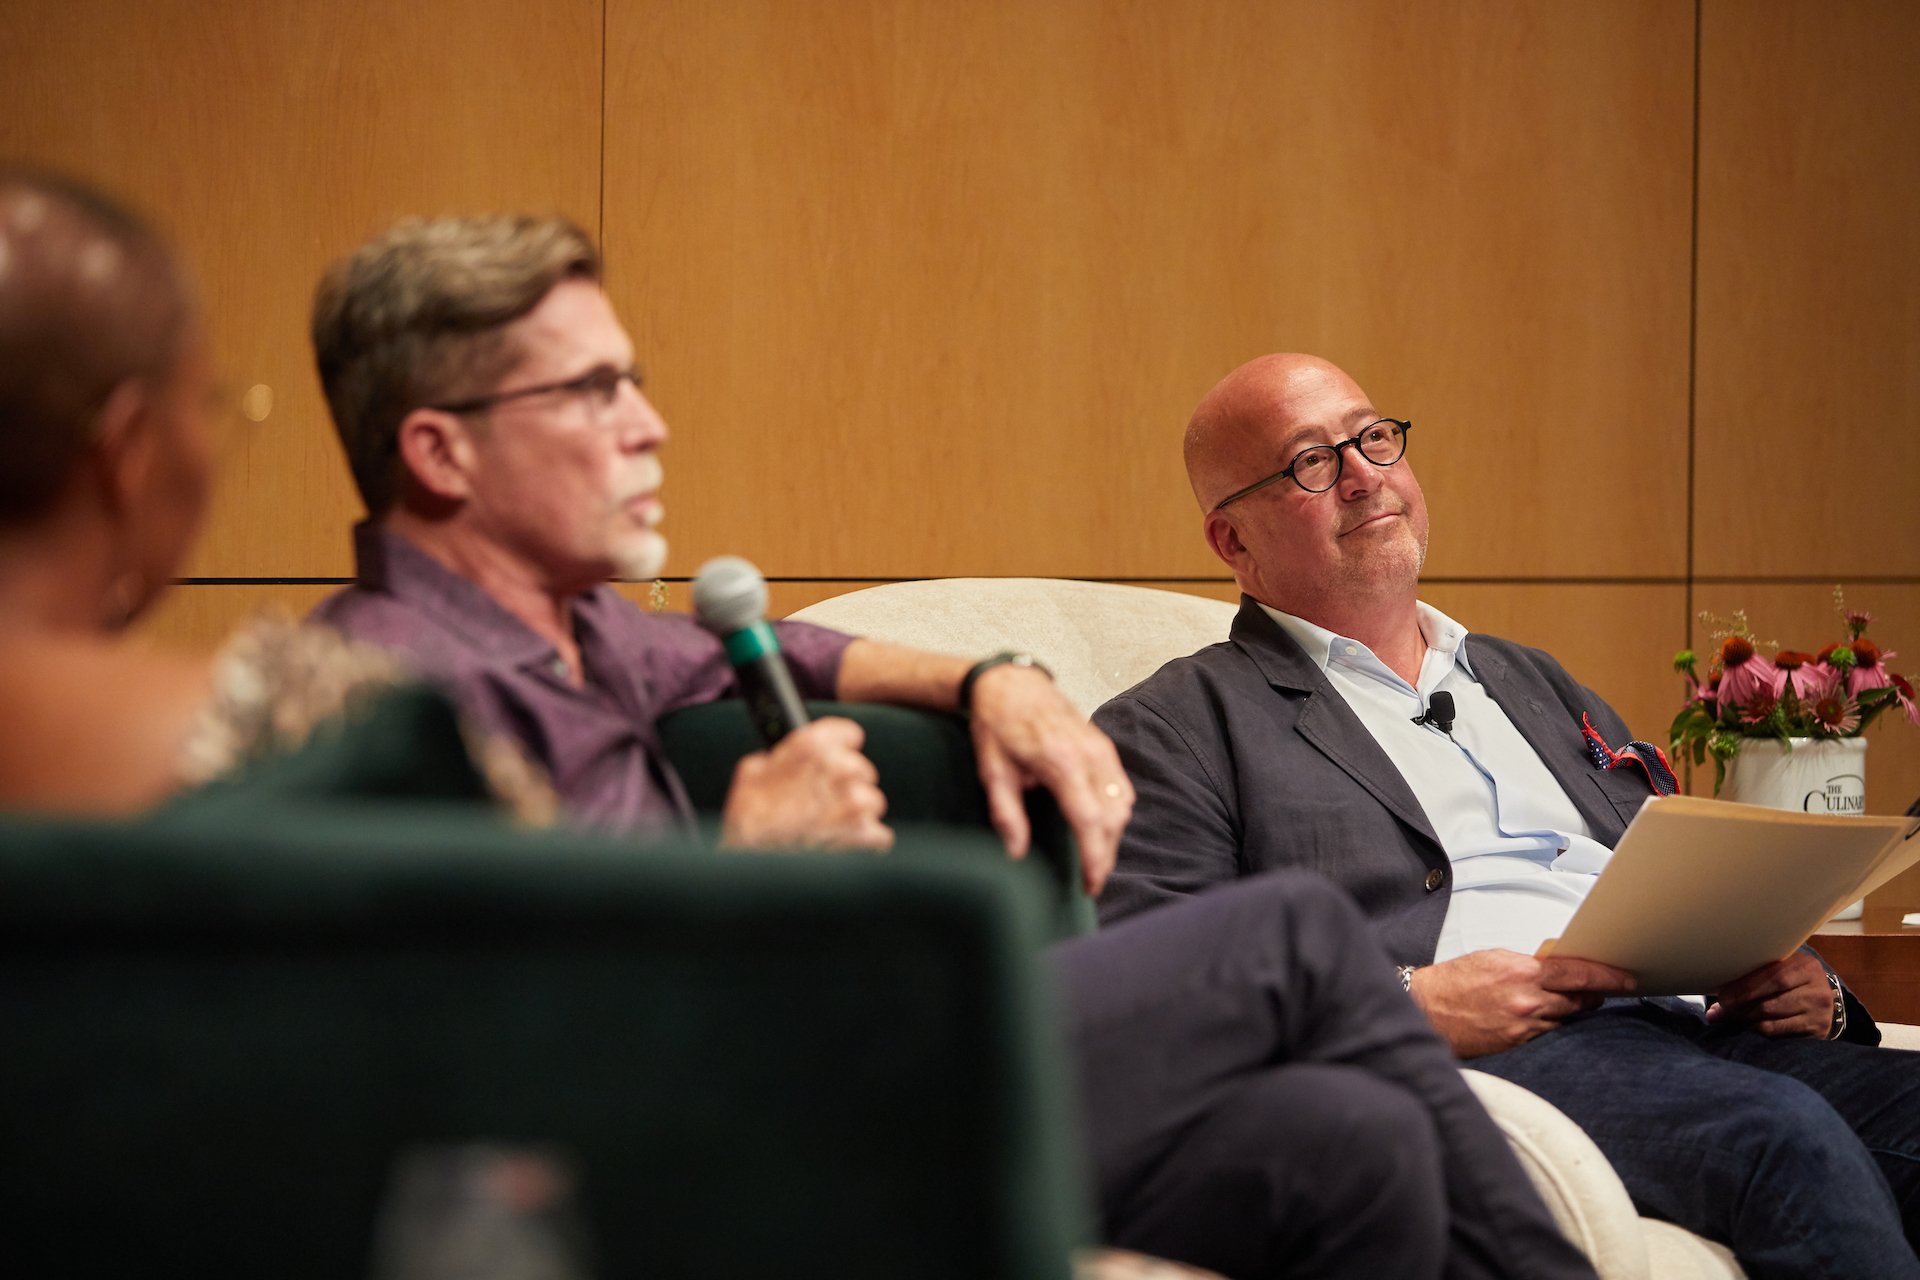 Andrew Zimmern listens on as Rick Bayless answers a question from the crowd.